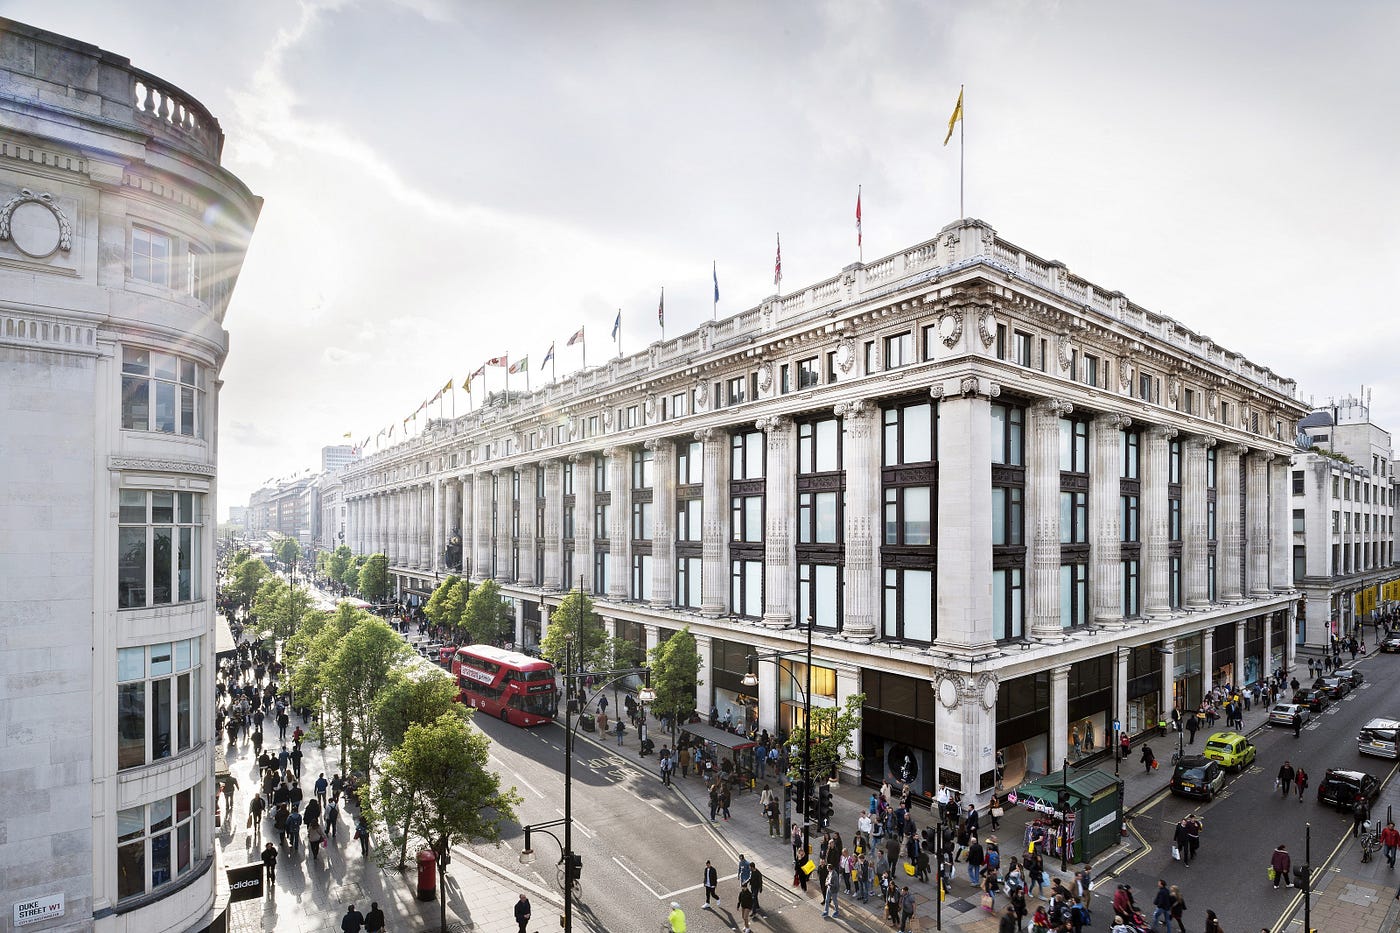 Selfridges: A masterclass in brick and mortar | by How They Make Money |  Medium